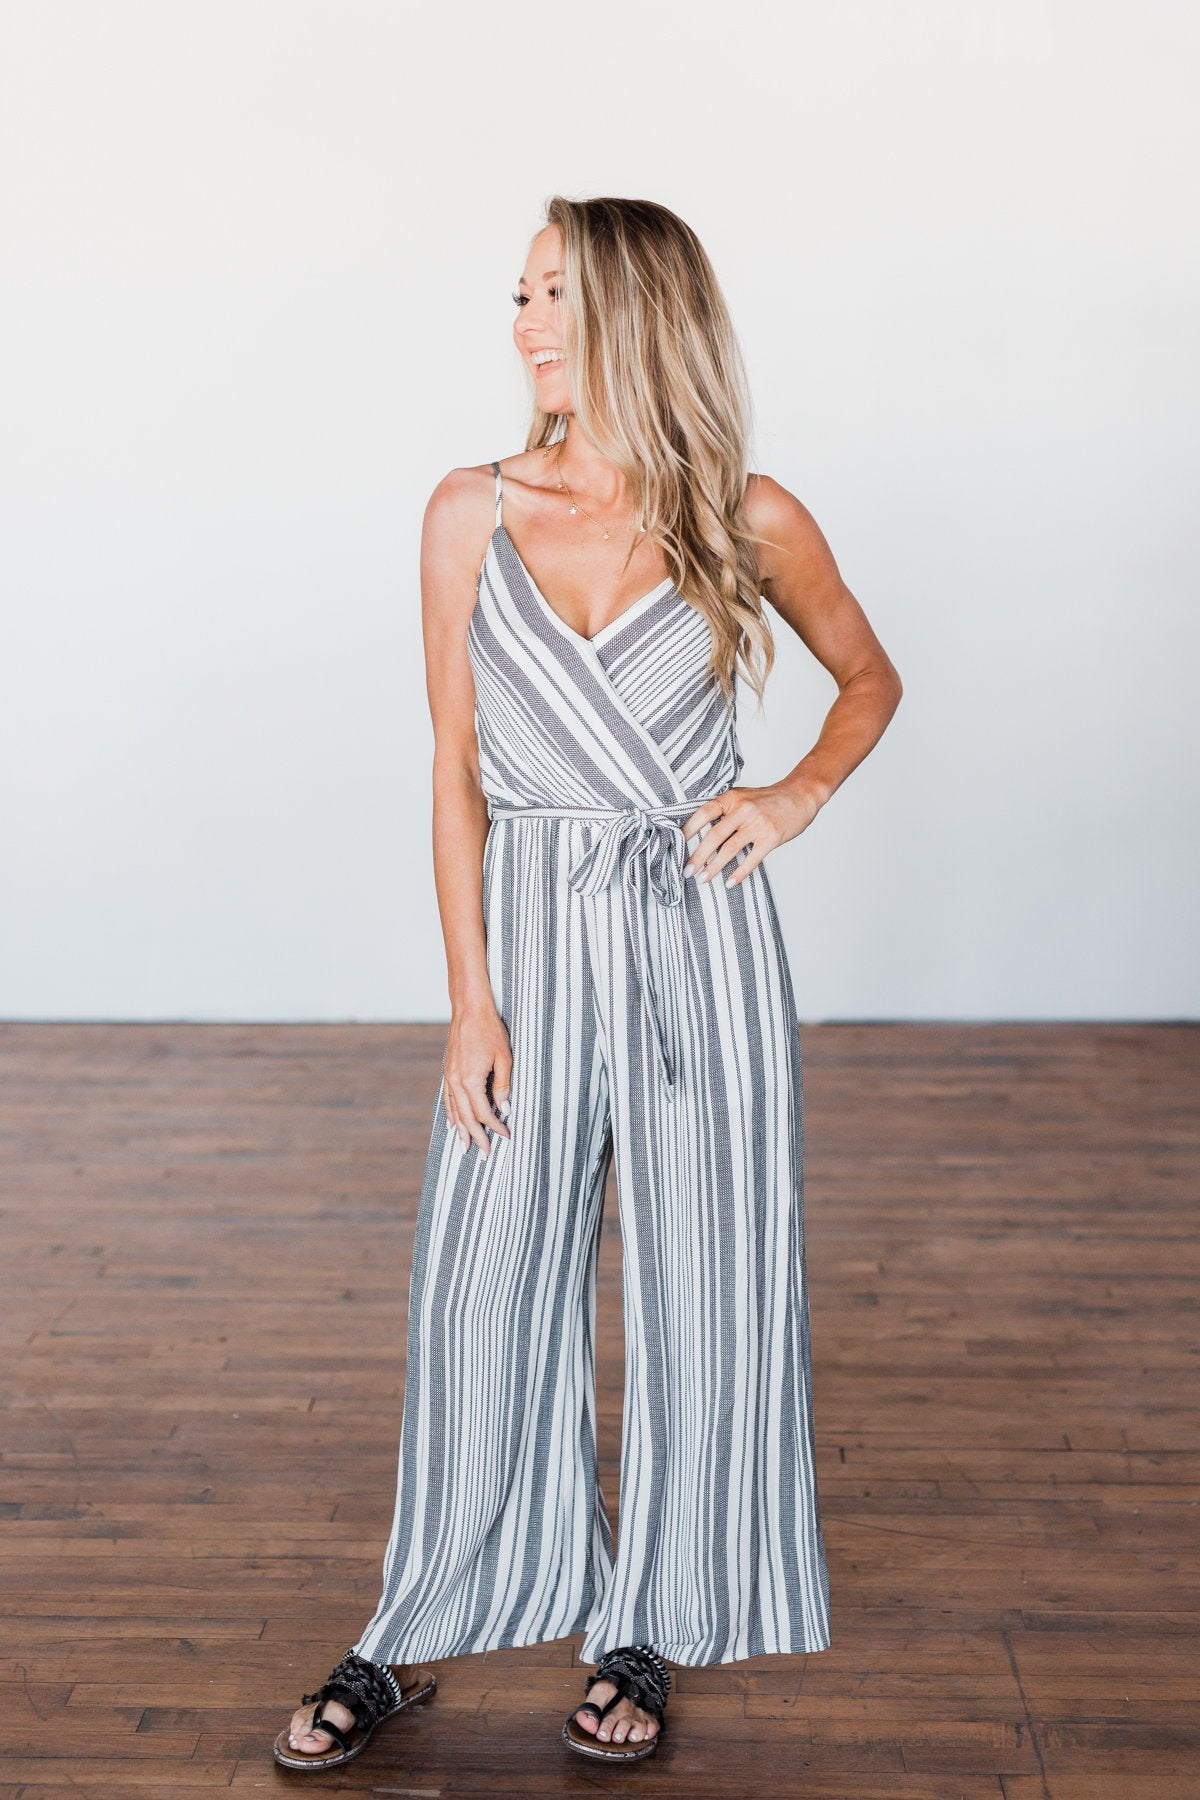 The Day Is Calling Striped Jumpsuit- Black & Ivory – The Pulse Boutique